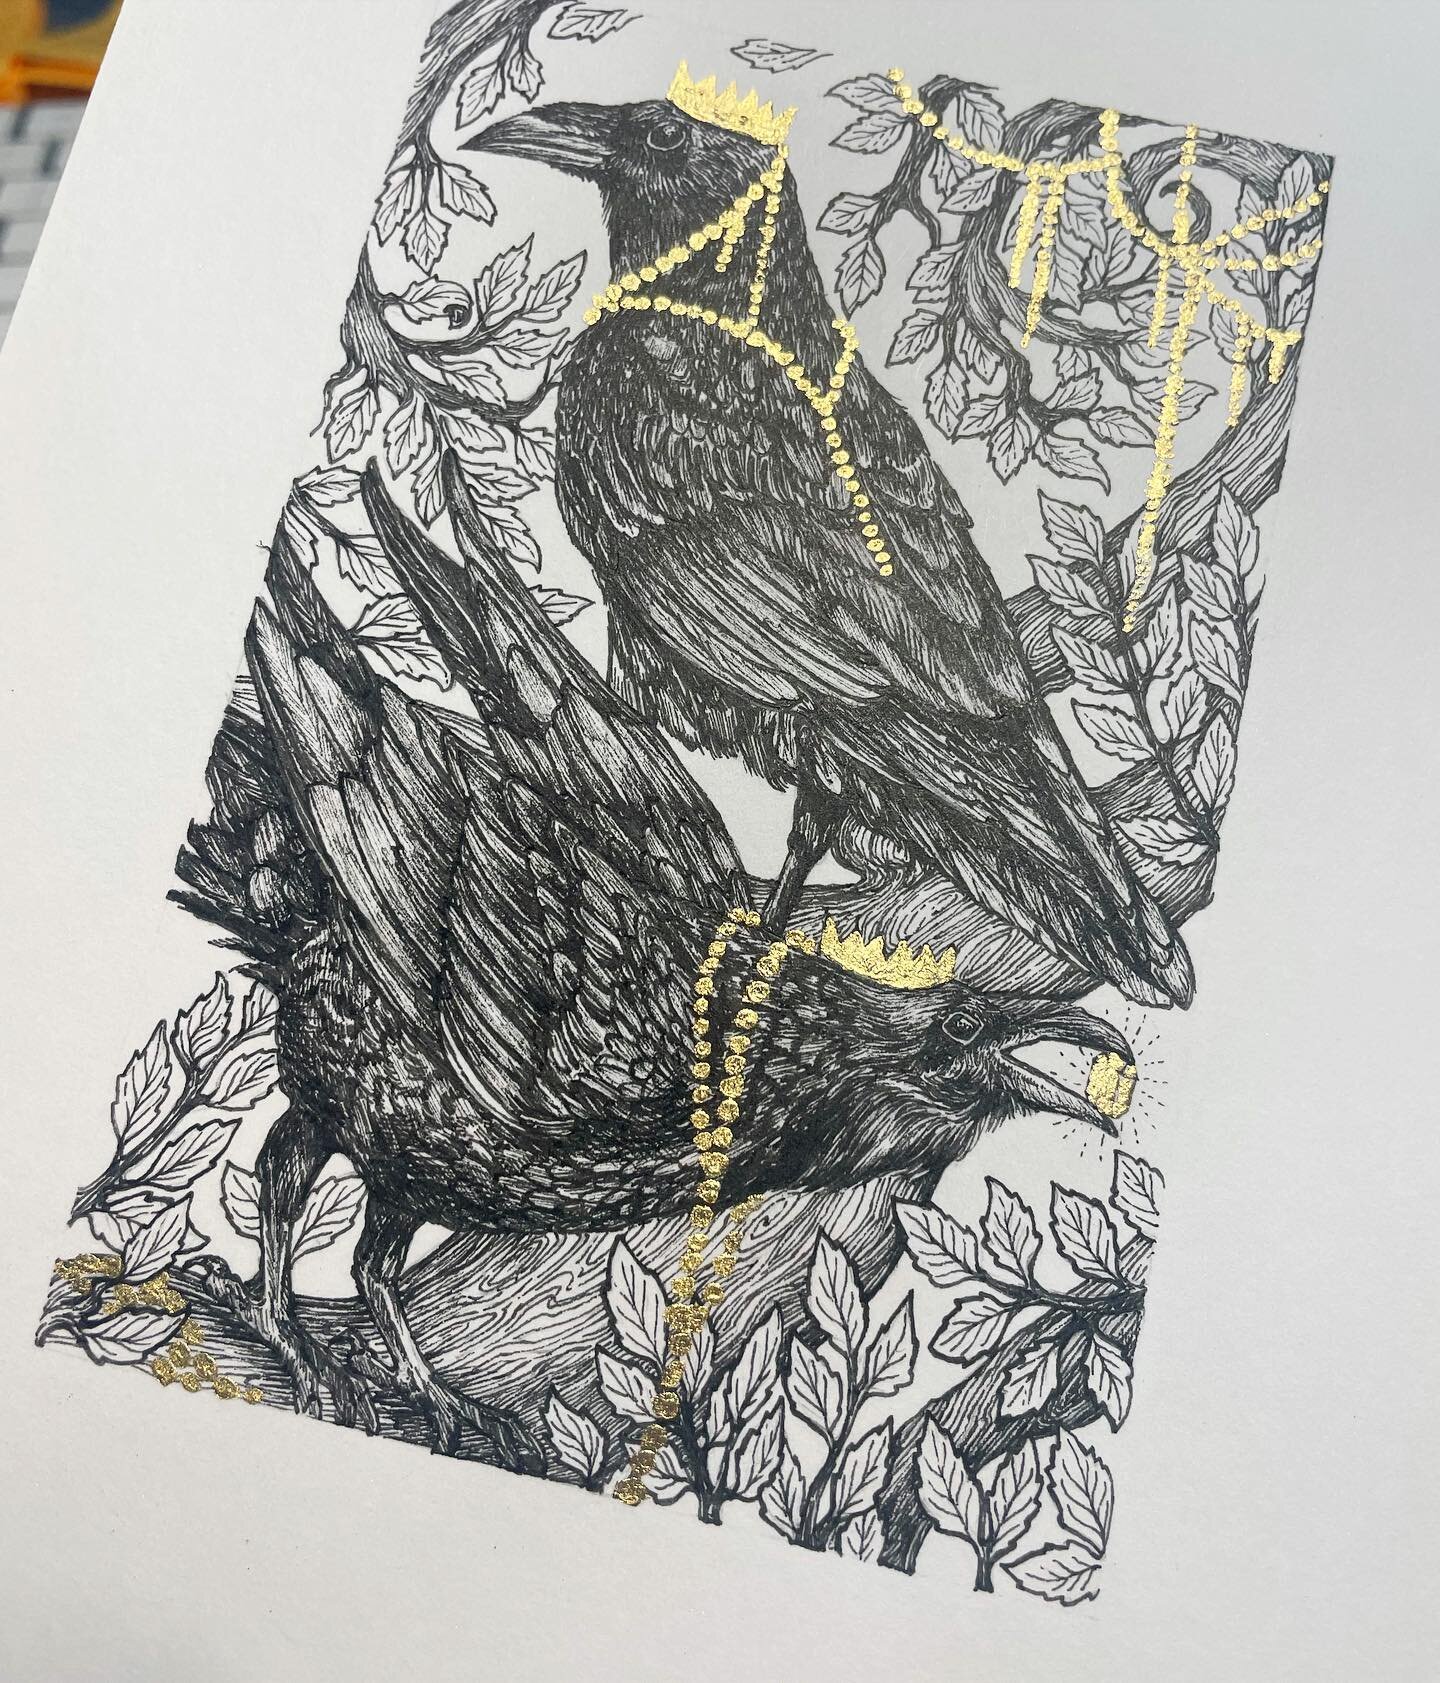 The next new pieces I&rsquo;m working on are going to be etchings! But before I get to the copper, I&rsquo;ve made original drawings that I will then transfer to the plates. First up, is a new raven illustration! The edition of my original &ldquo;Hoa